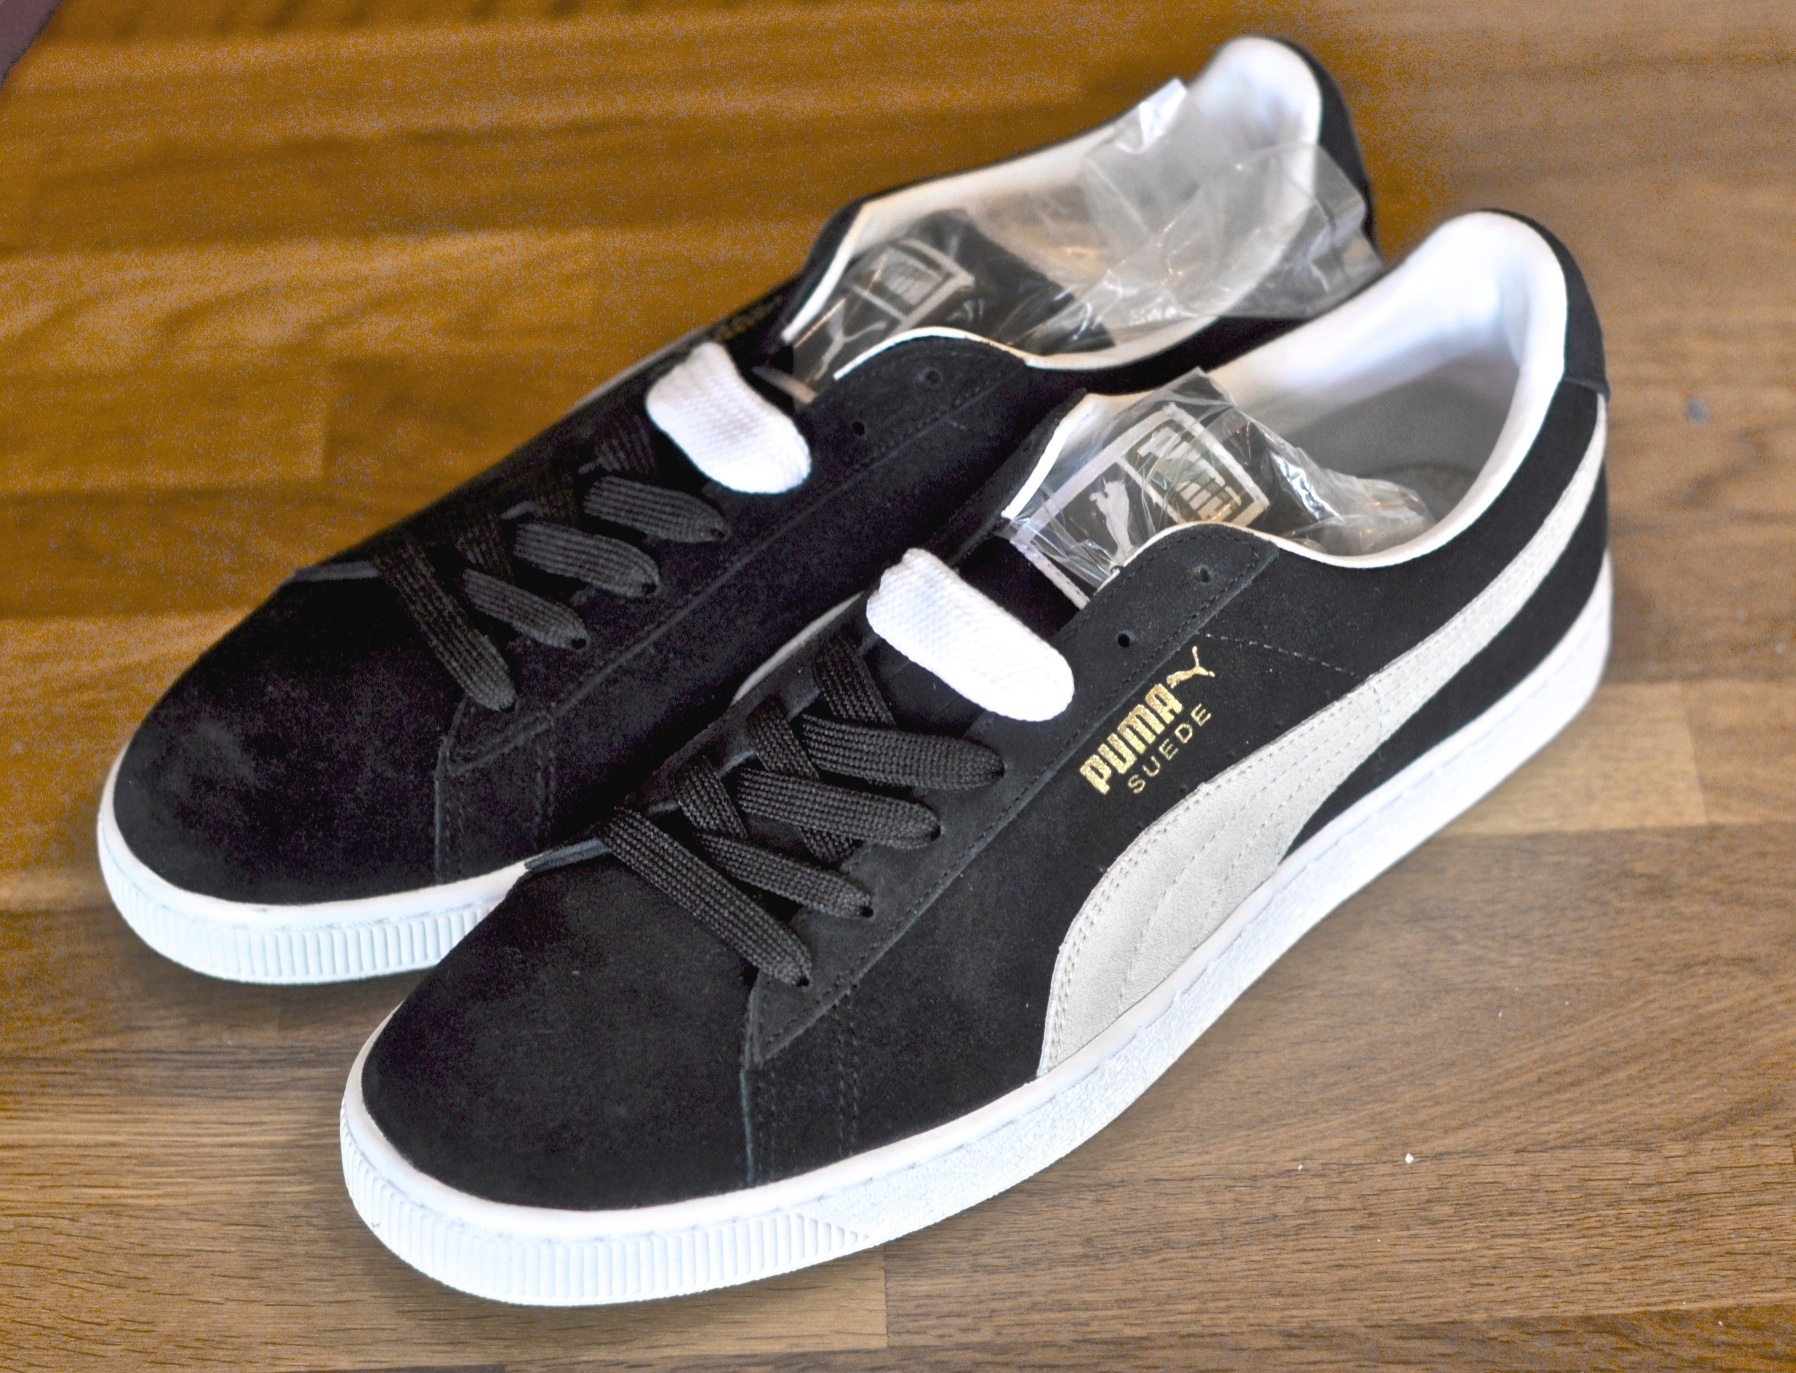 Puma Suede Classic Sneakers Black And White Mens New Ebay